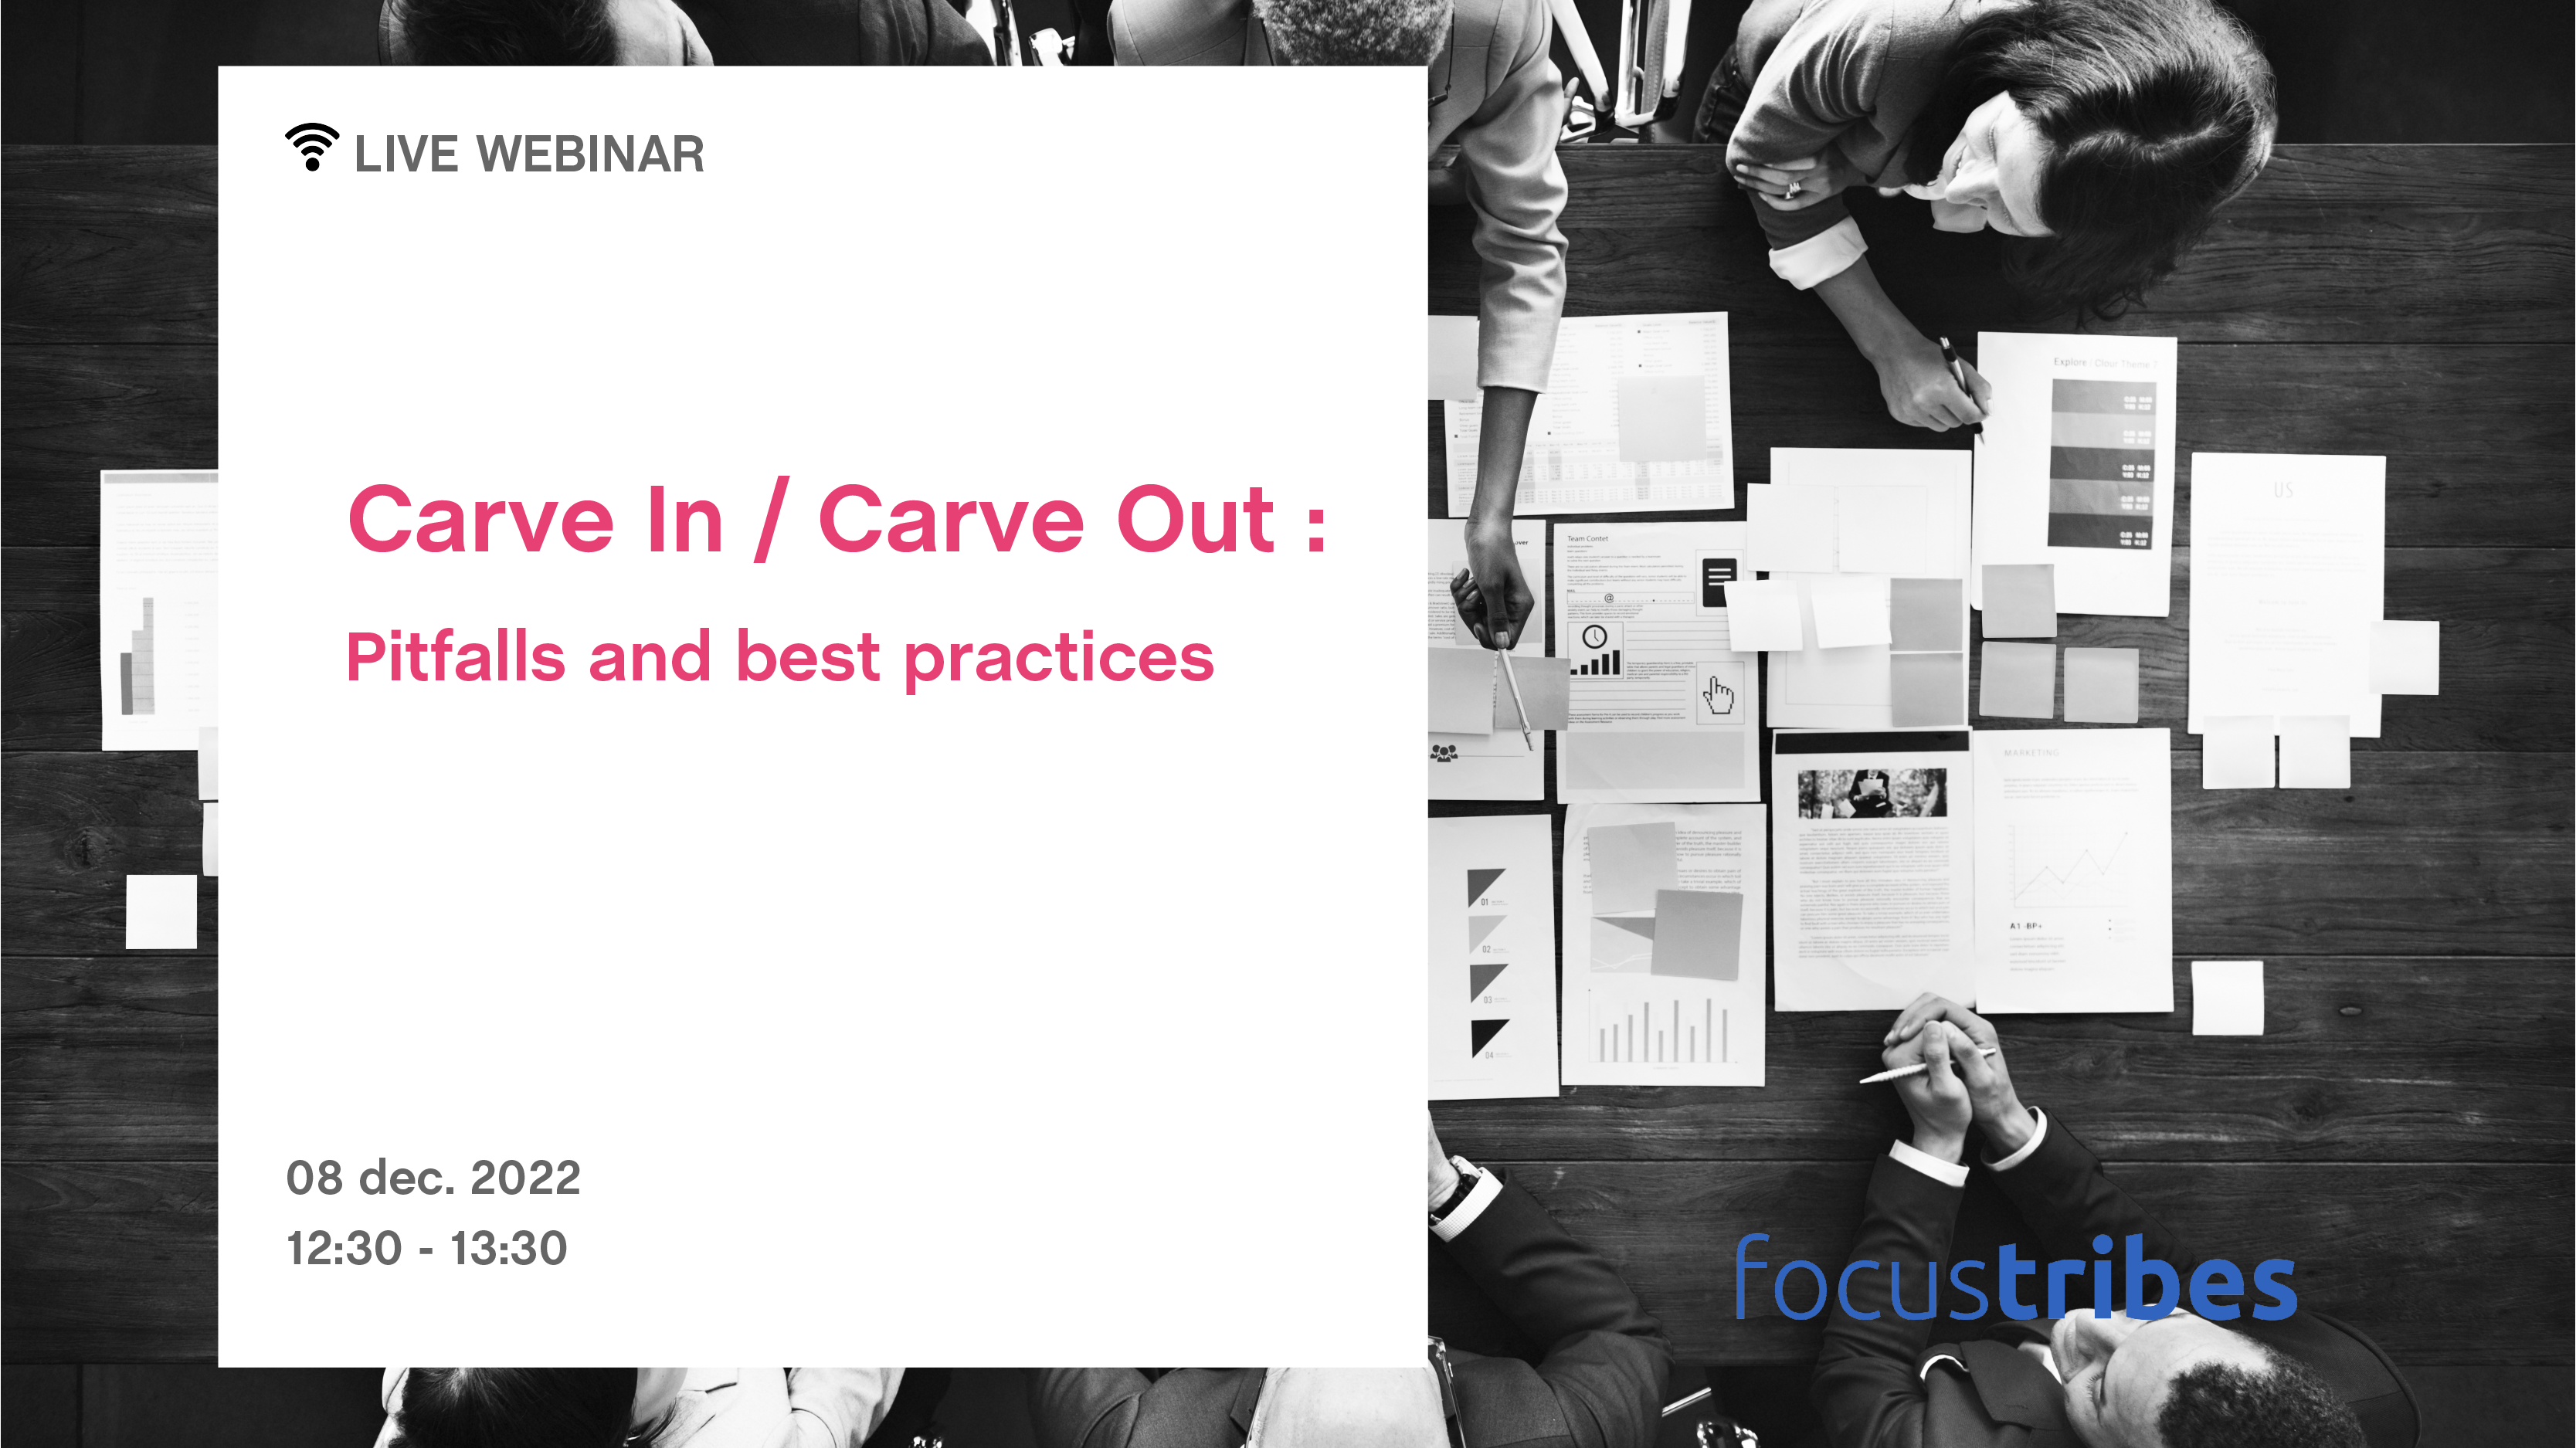 WEBINAR🇫🇷! Carve In / Carve Out : pitfalls and best practices